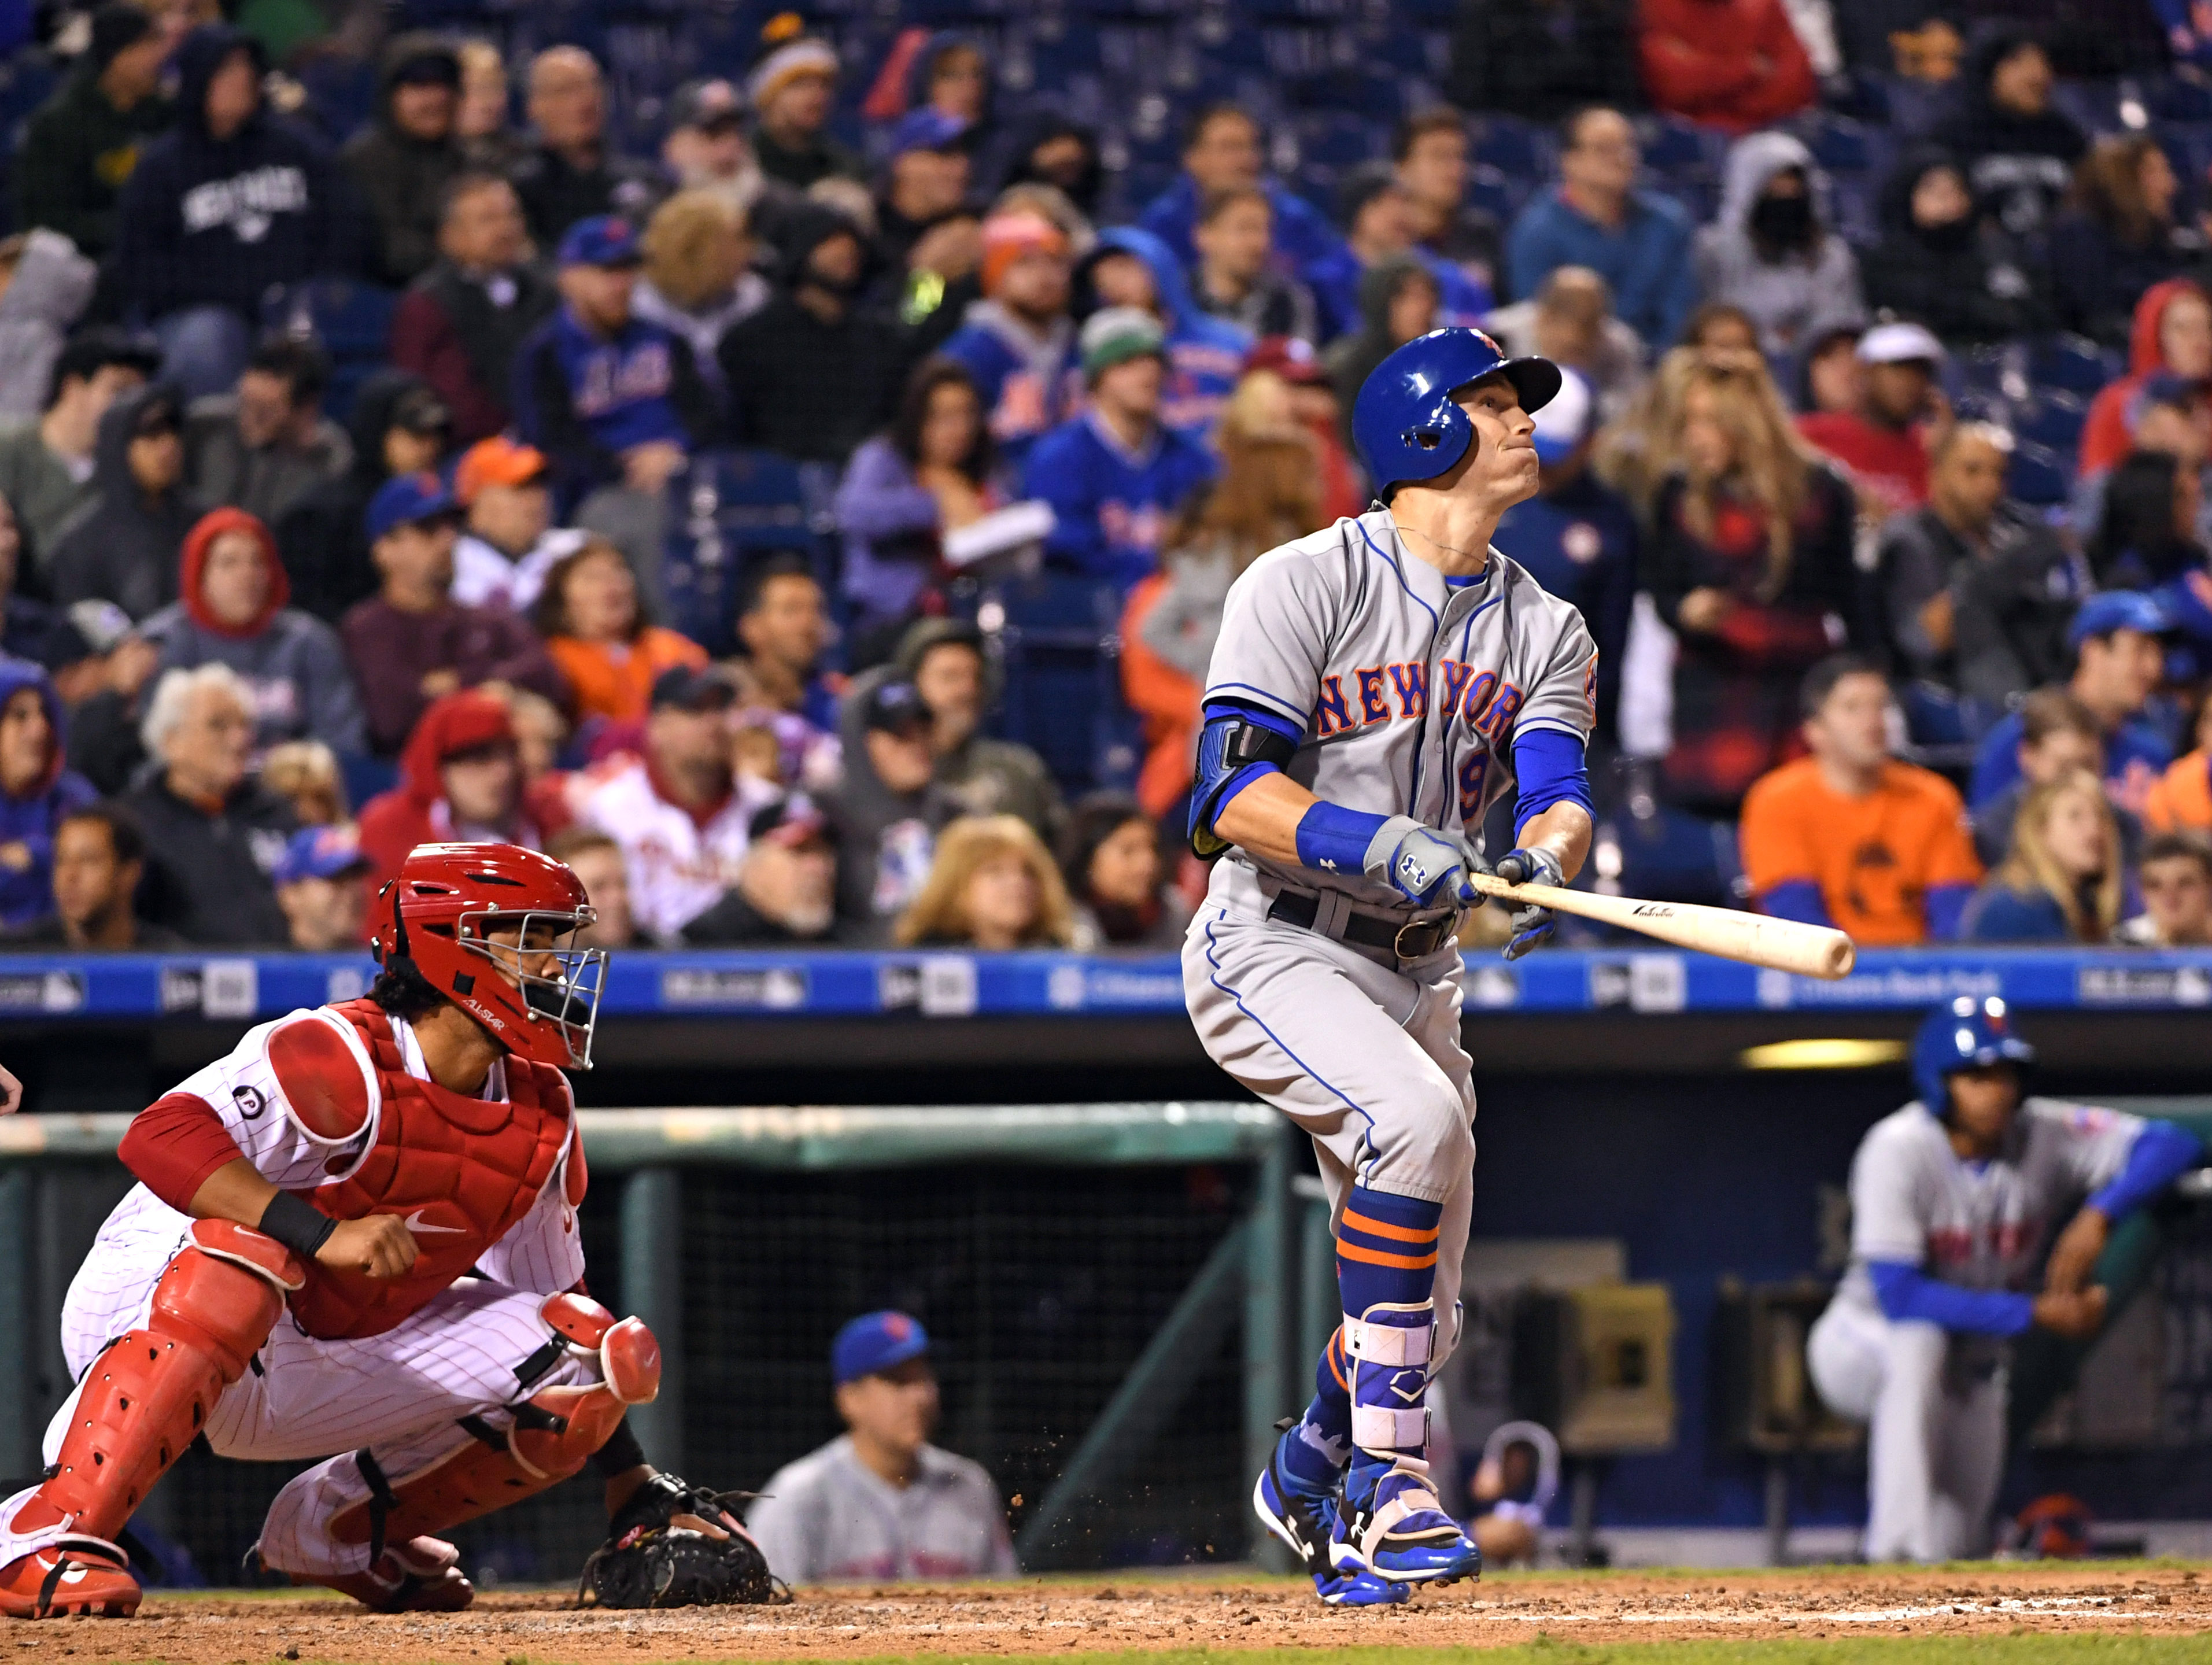 Here’s A Look at What The New York Mets’ Opening Day Lineup Could Look